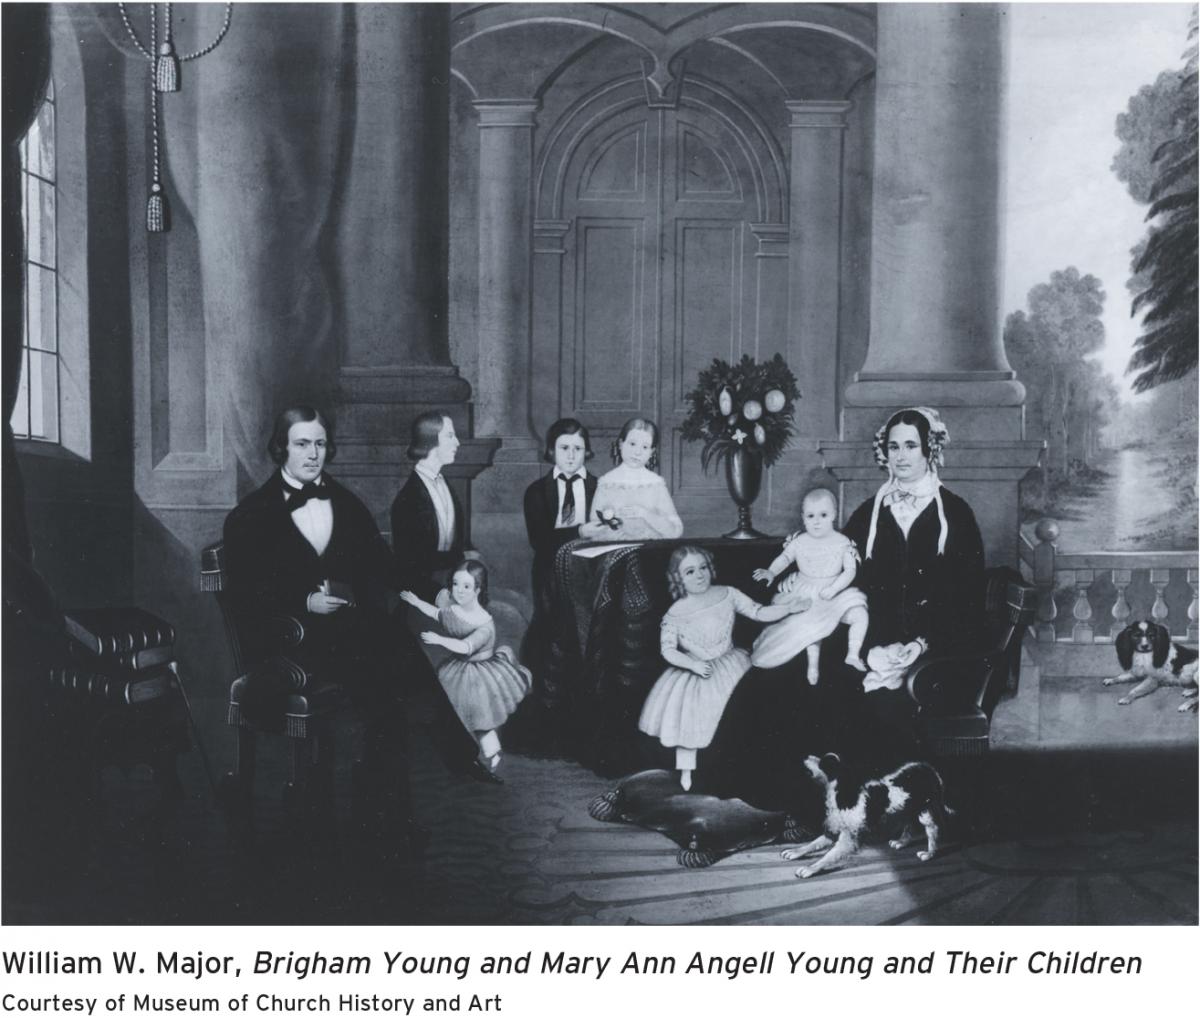 "William W. Major, Brigham Young and Marry Ann Angell Young and Their Children"